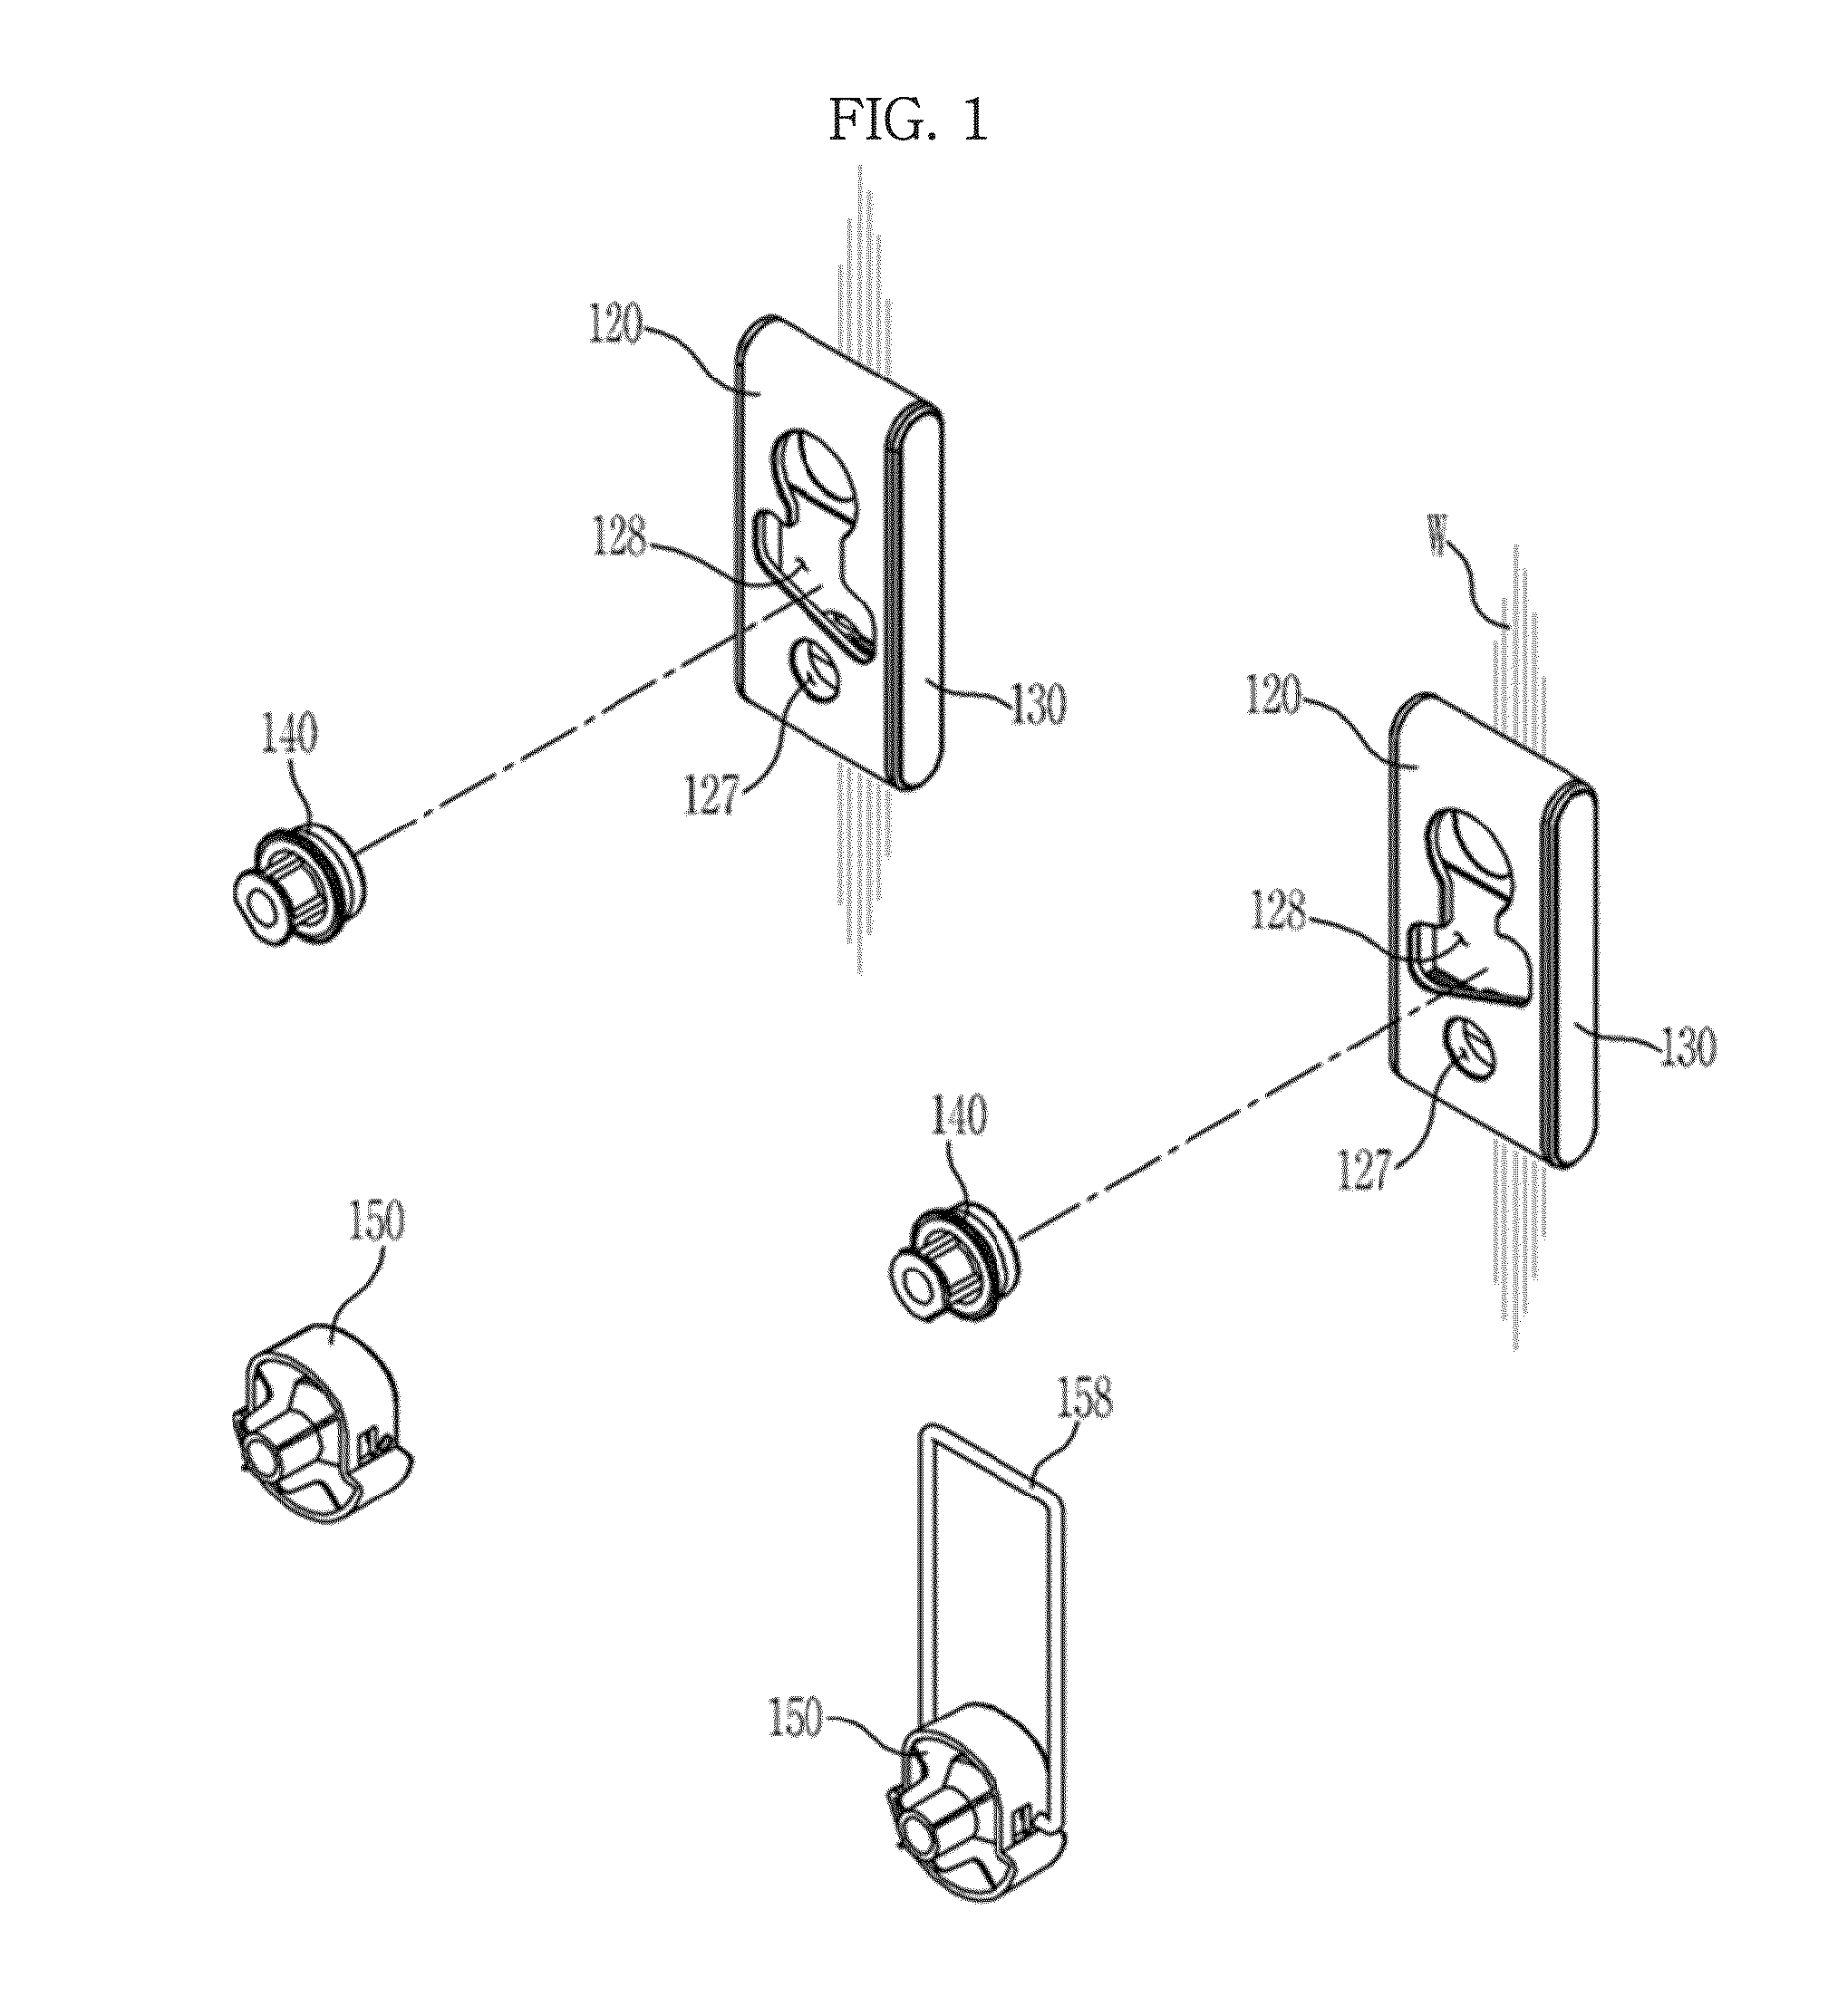 Supporting device to display apparatus